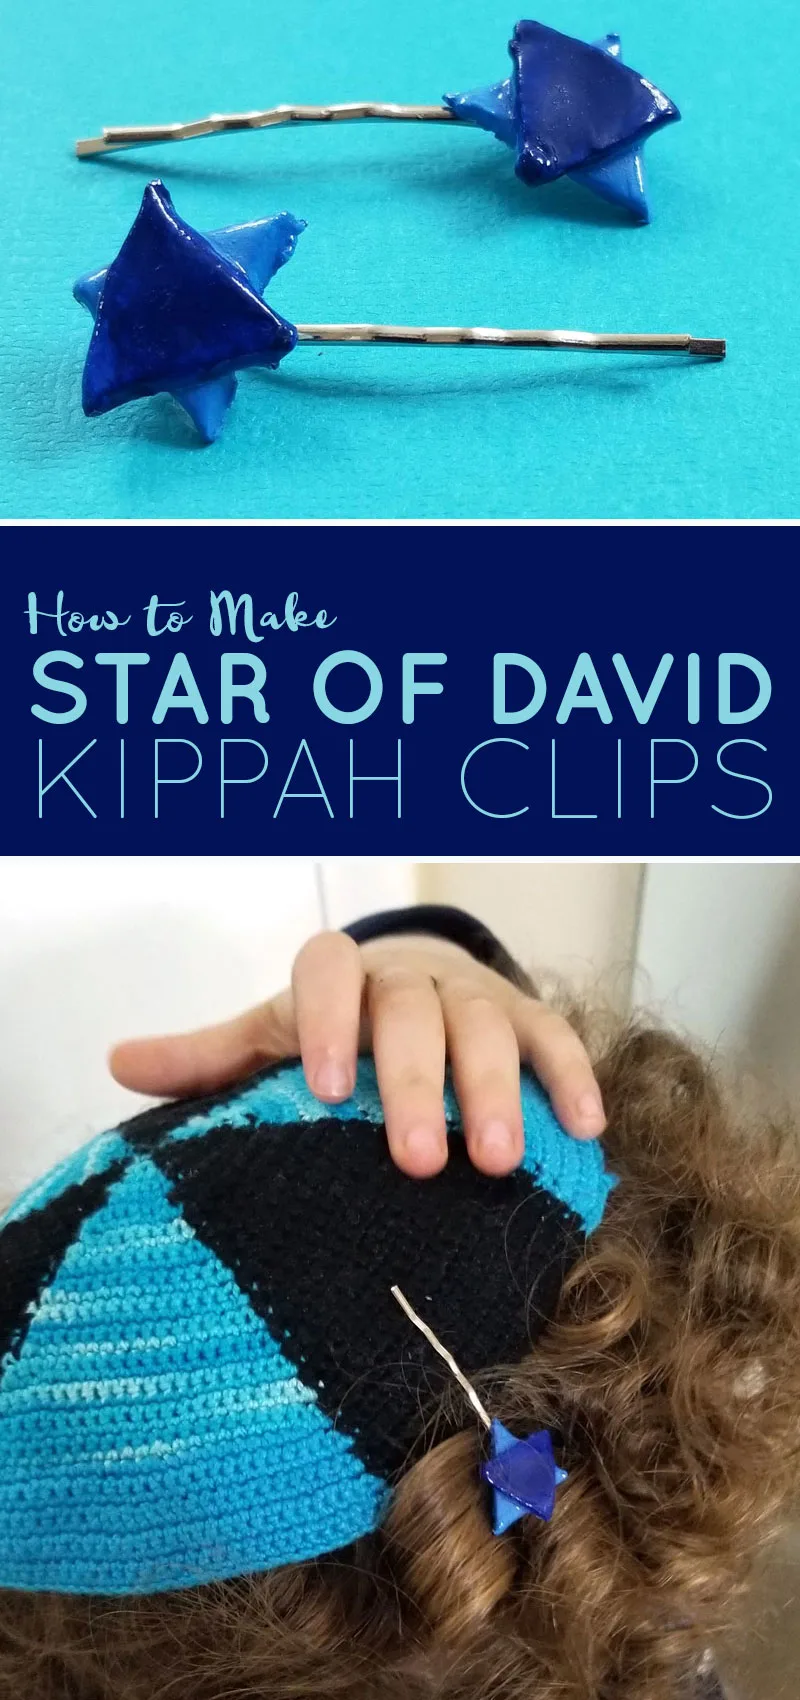 A fun Jewish craft for moms - these clay star of david Kippah clips are super fun for celebrating an Upsherin or Jewish third birthday party!